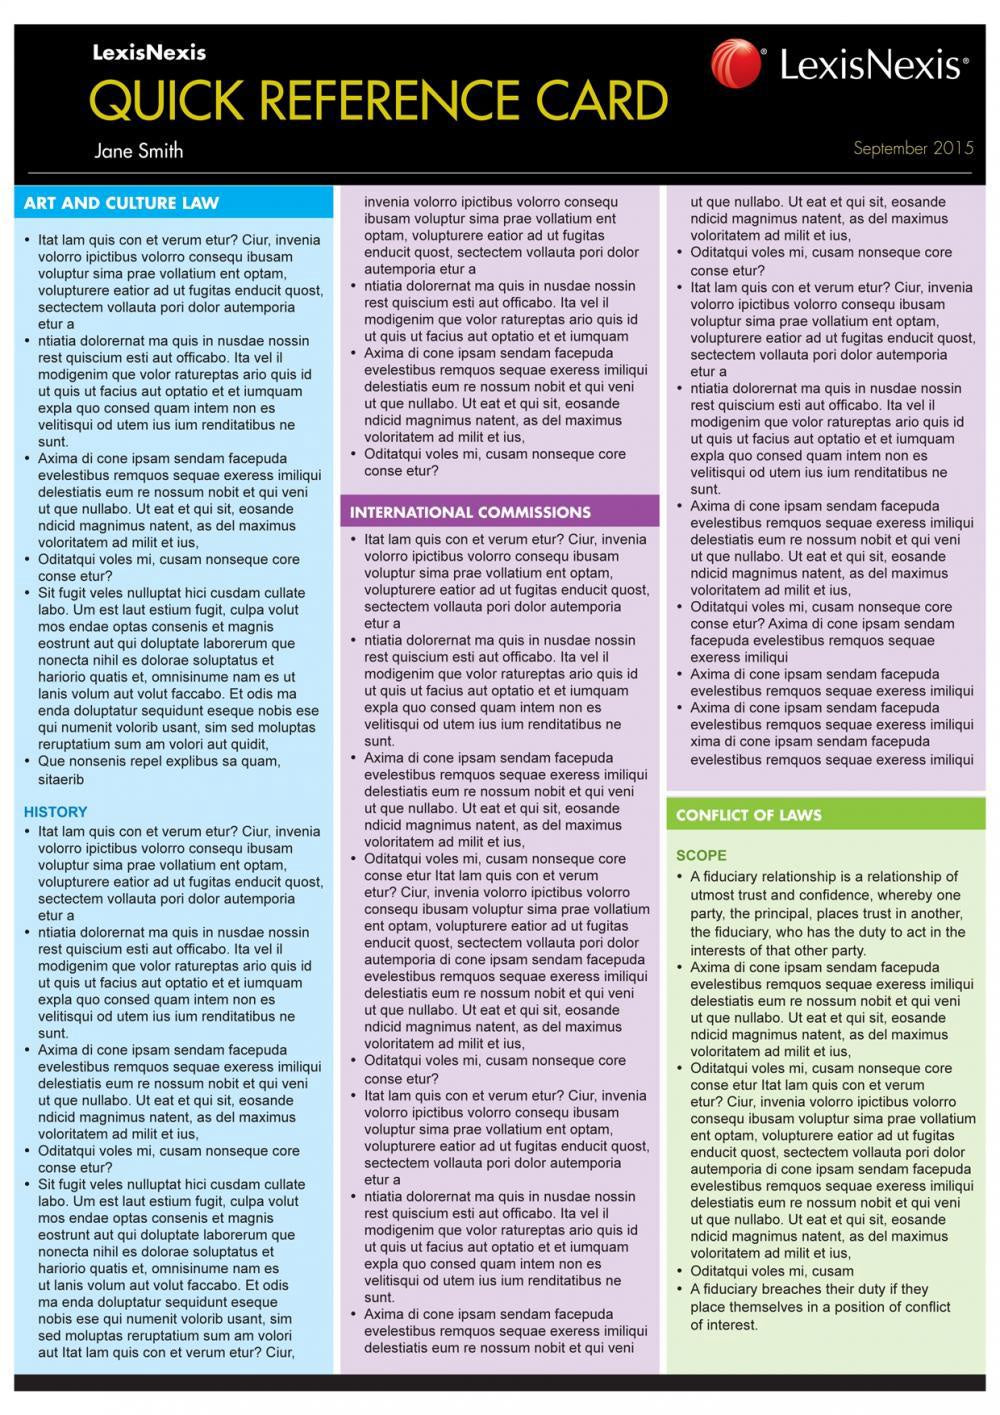 EQUITY QUICK REFERENCE CARD 3RD EDITION